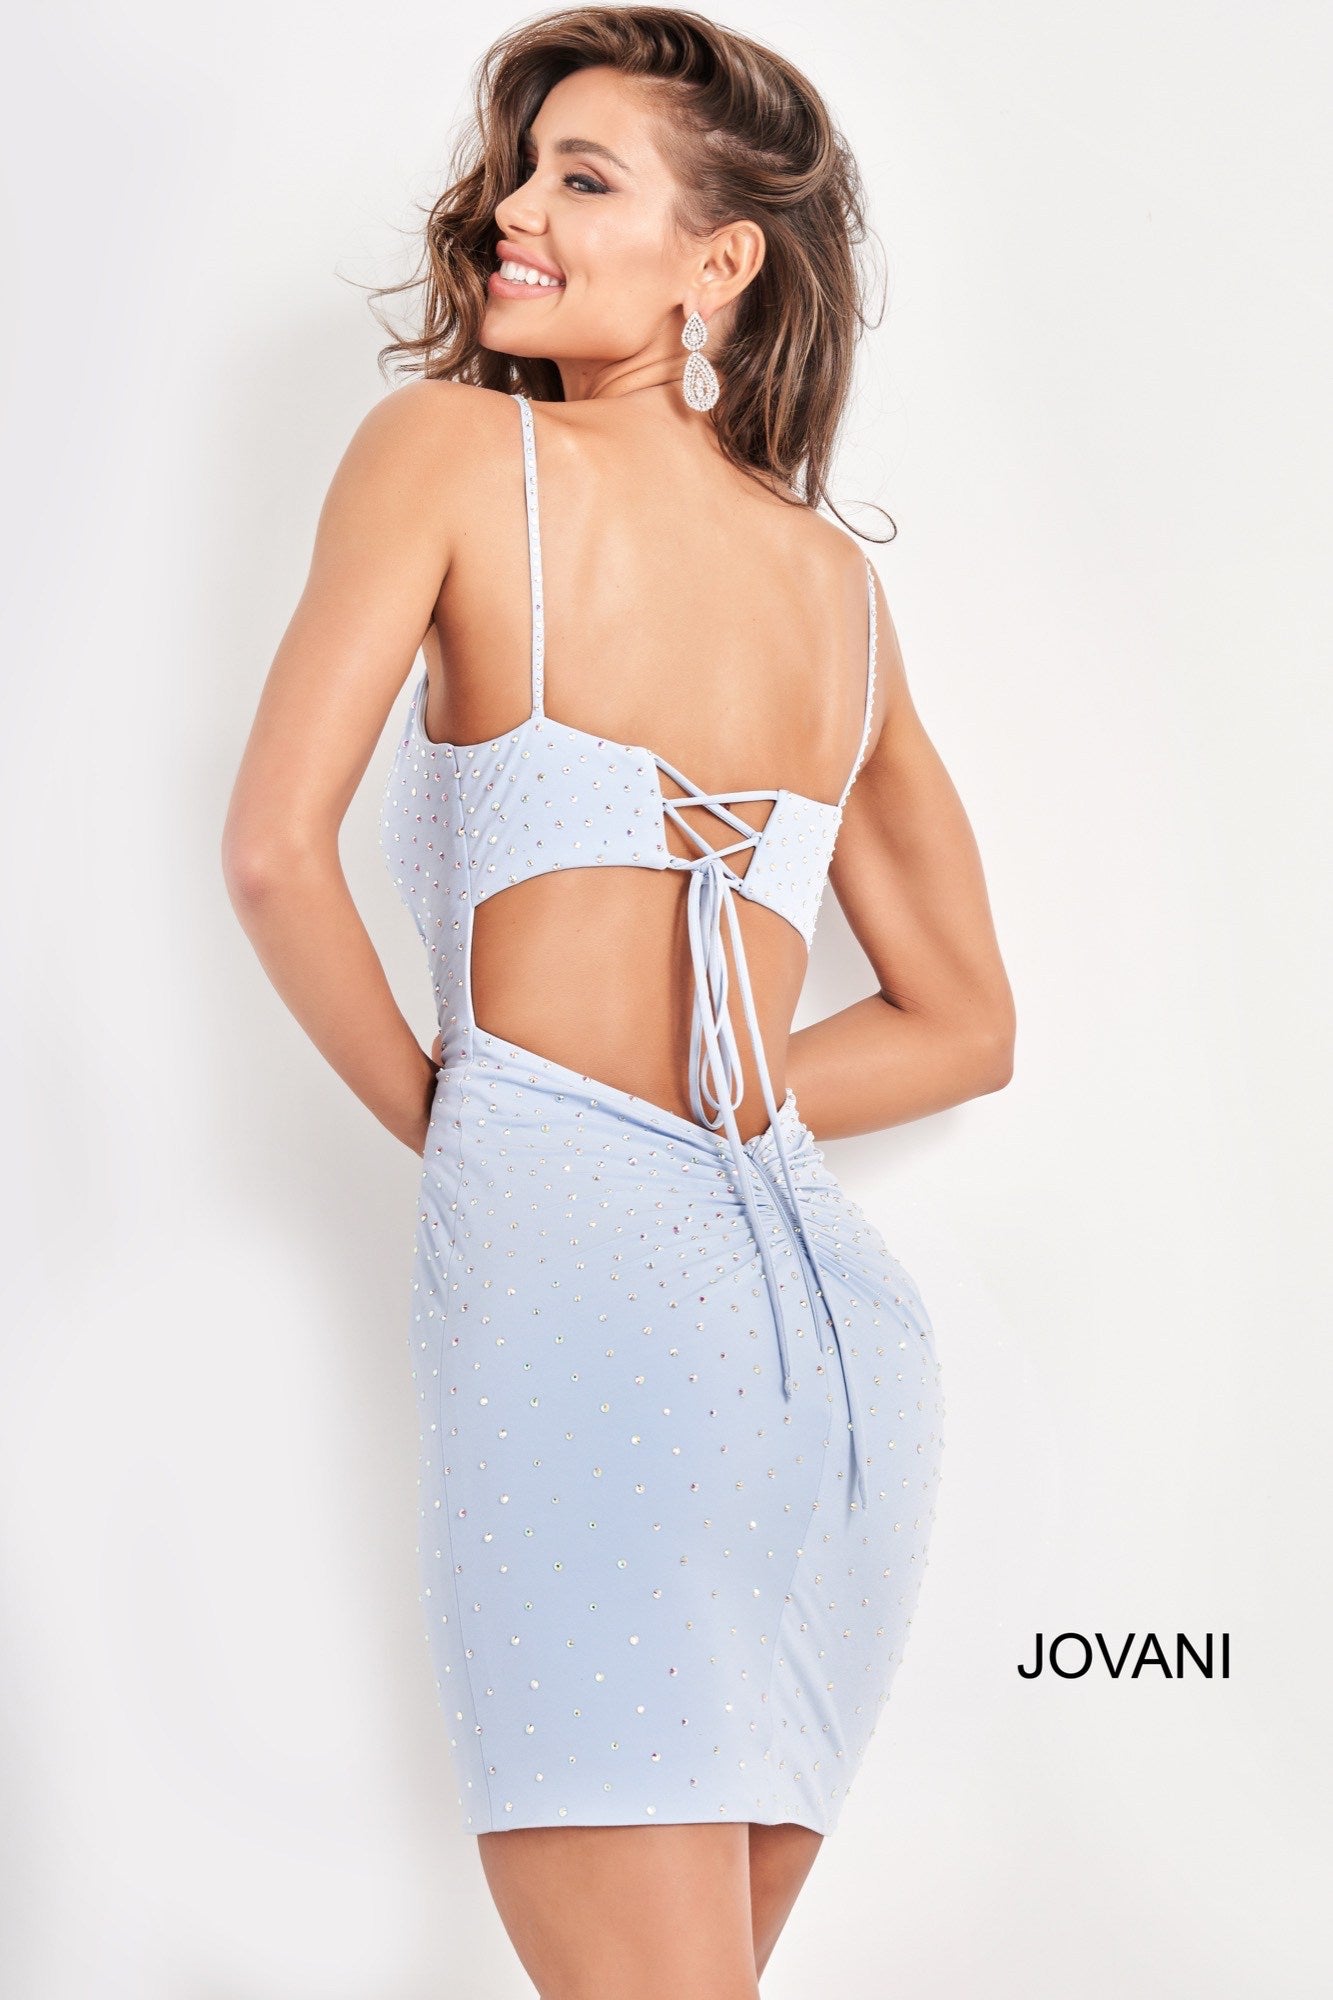 Jovani 05513 is a short fitted Crystal Rhinestone embellished formal cocktail dress. V Neckline with embellished spaghetti straps. cut out back with a corset lace up tie closure. Ruched hip area accentuates curves. Great formal evening gown.  Available Sizes: 00,0,2,4,6,8,10,12,14,16,18,20,22,24  Available Colors: Light Blue, Black